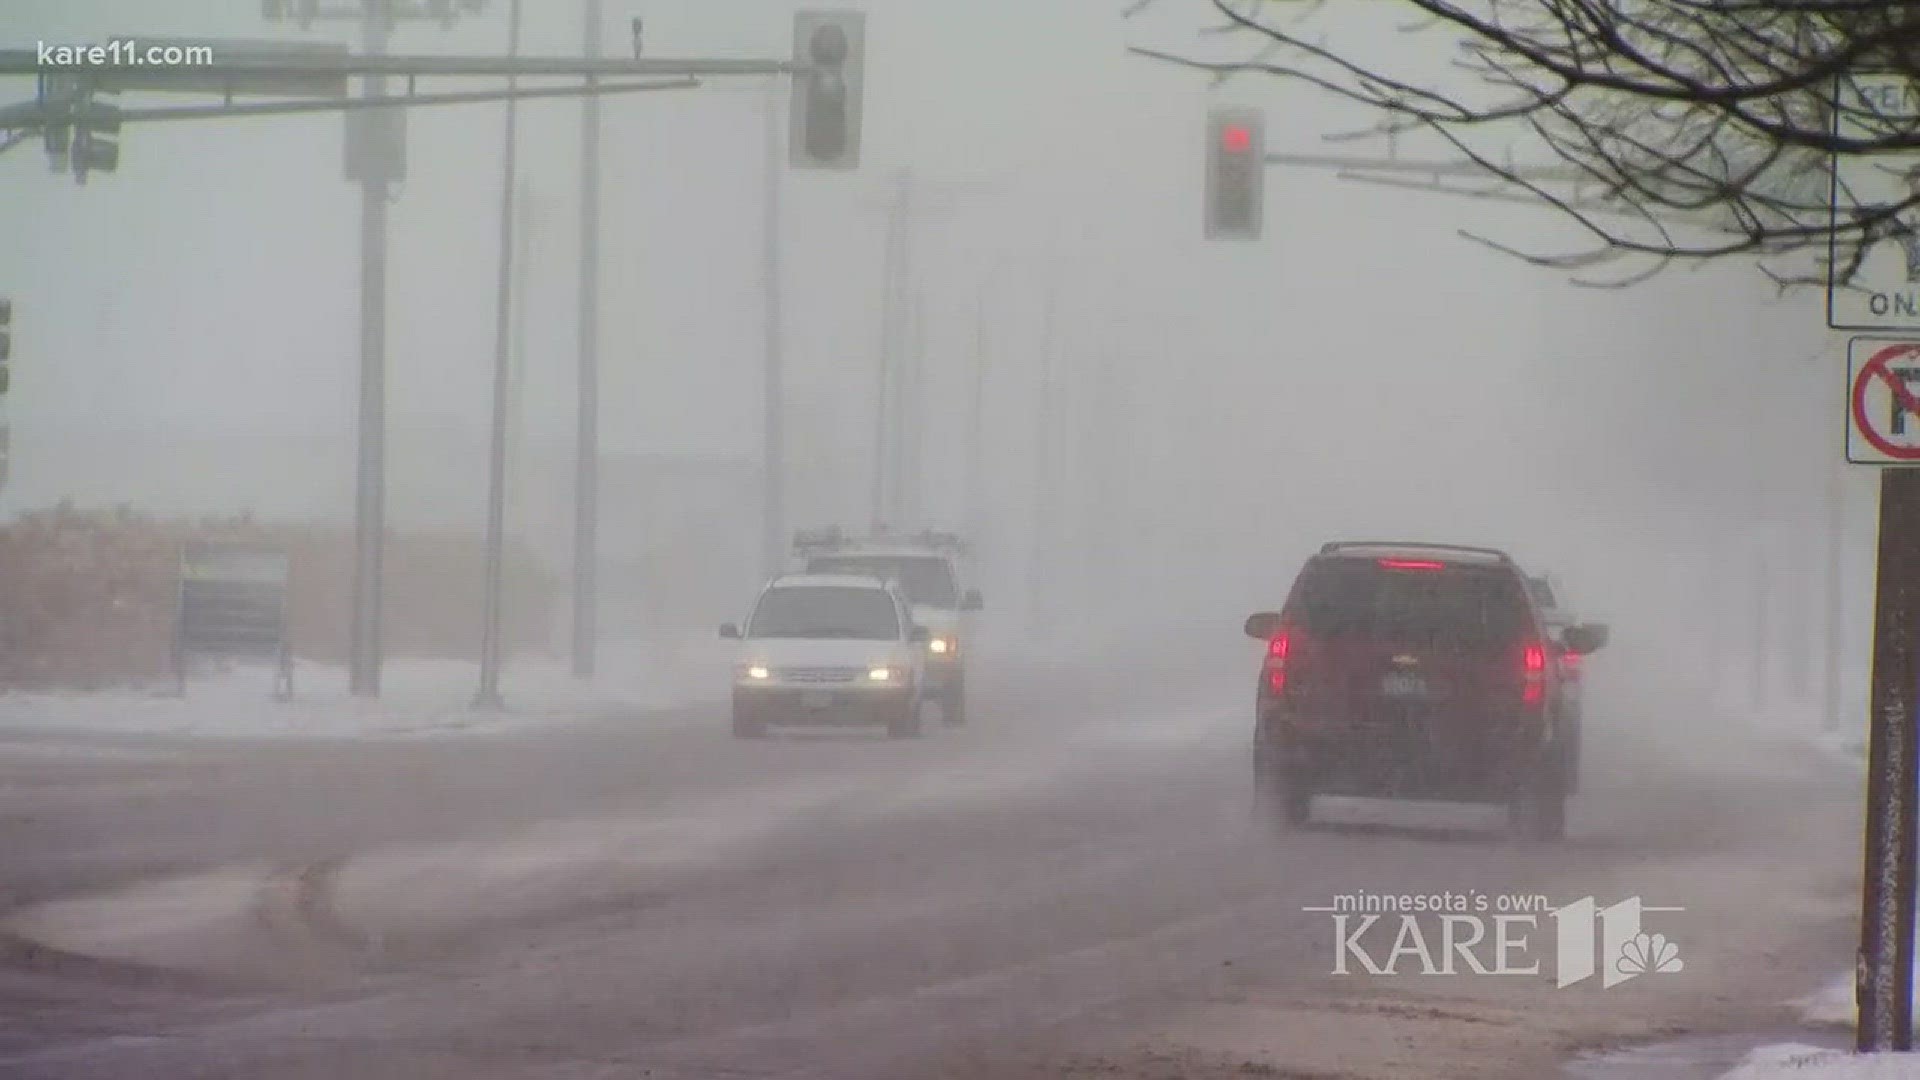 KARE 11's Zac Lashway went to Delano to talk to folks there about how they're coping with the wintry weather.